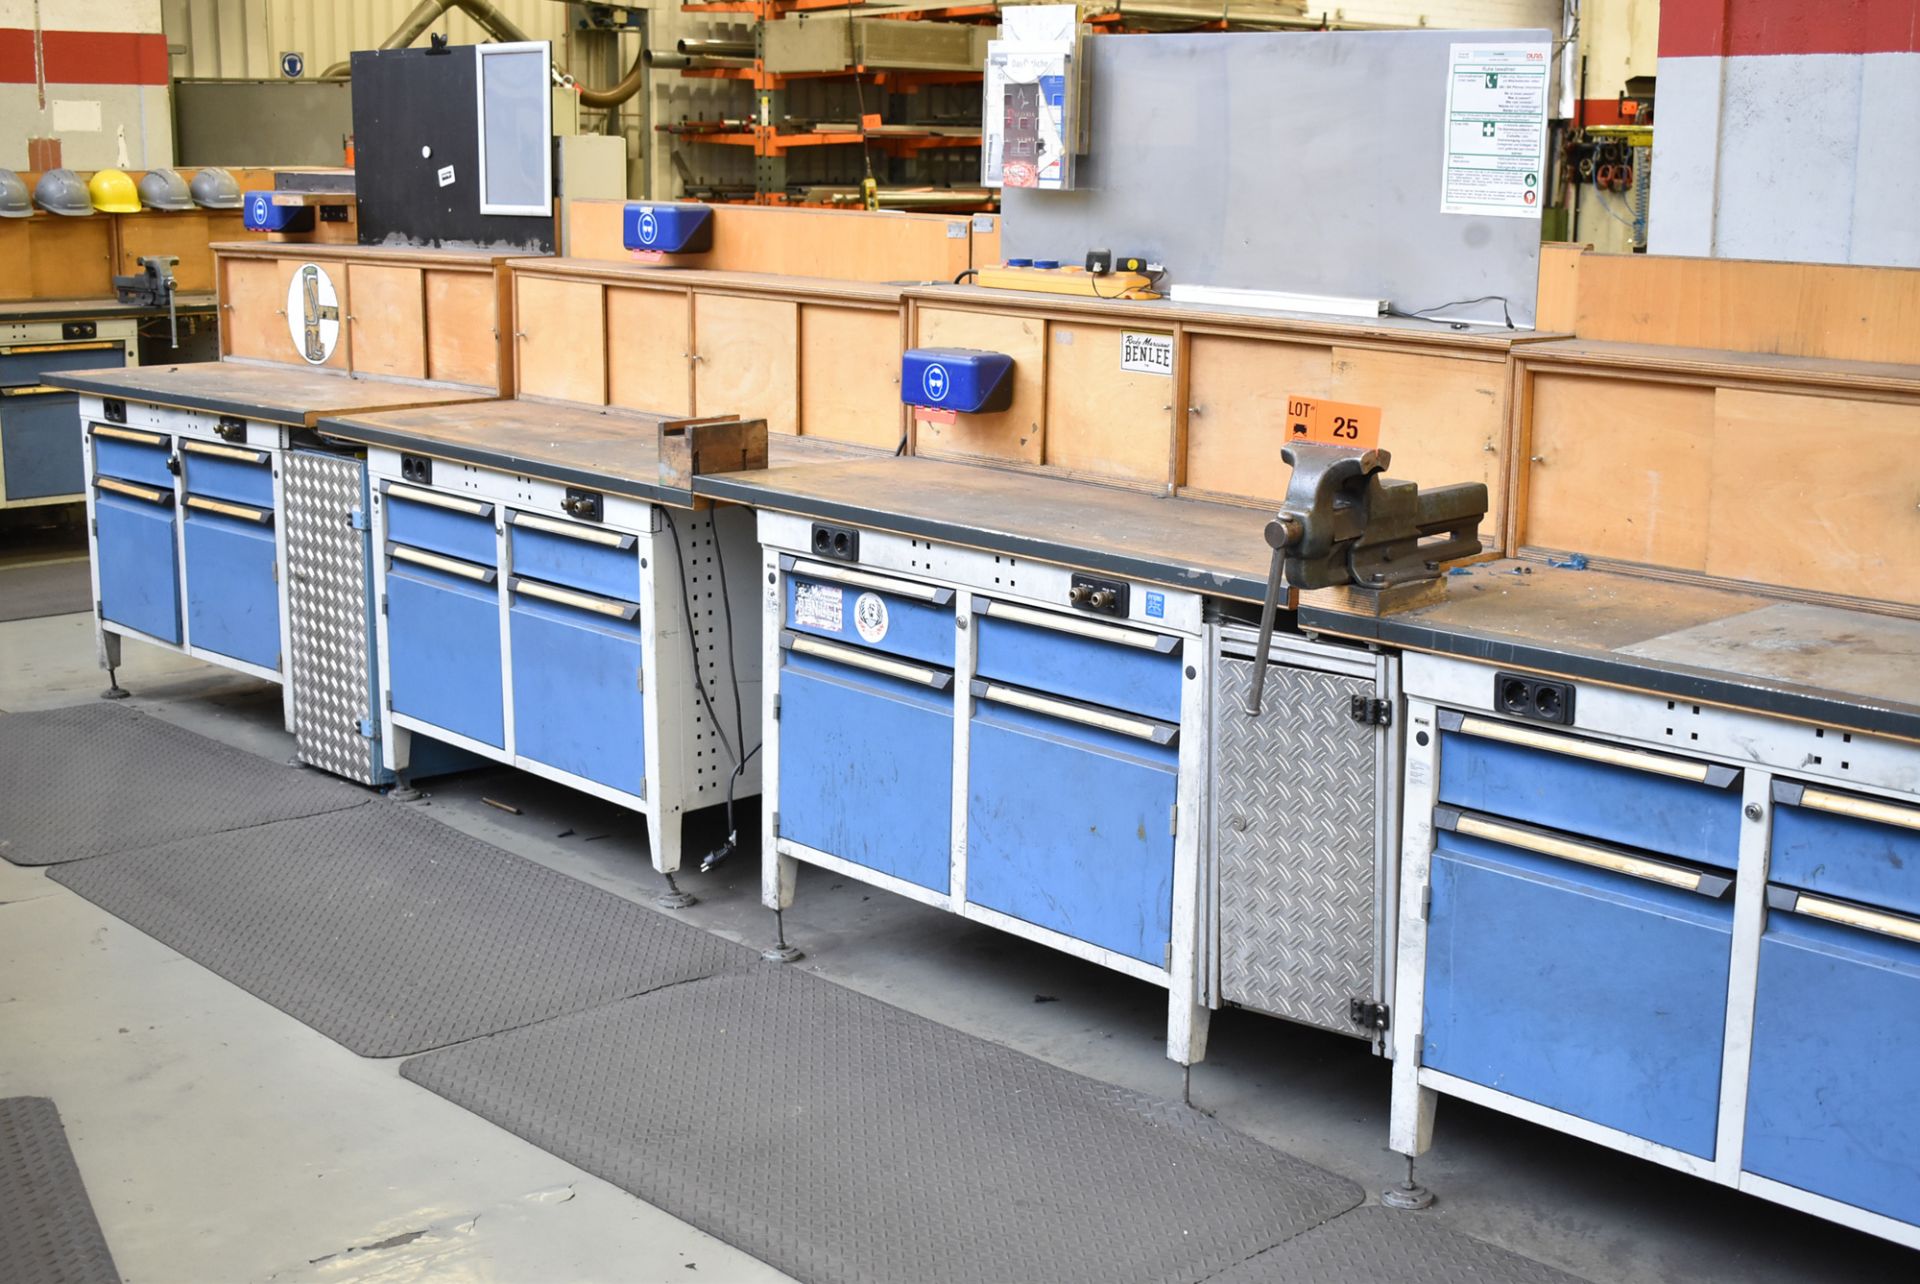 LOT/ (8) KIND WOOD TOP WORK BENCHES WITH (3) 140MM VISES, POWER AND AIR OUTLETS (BAU 9) [Removal Fee